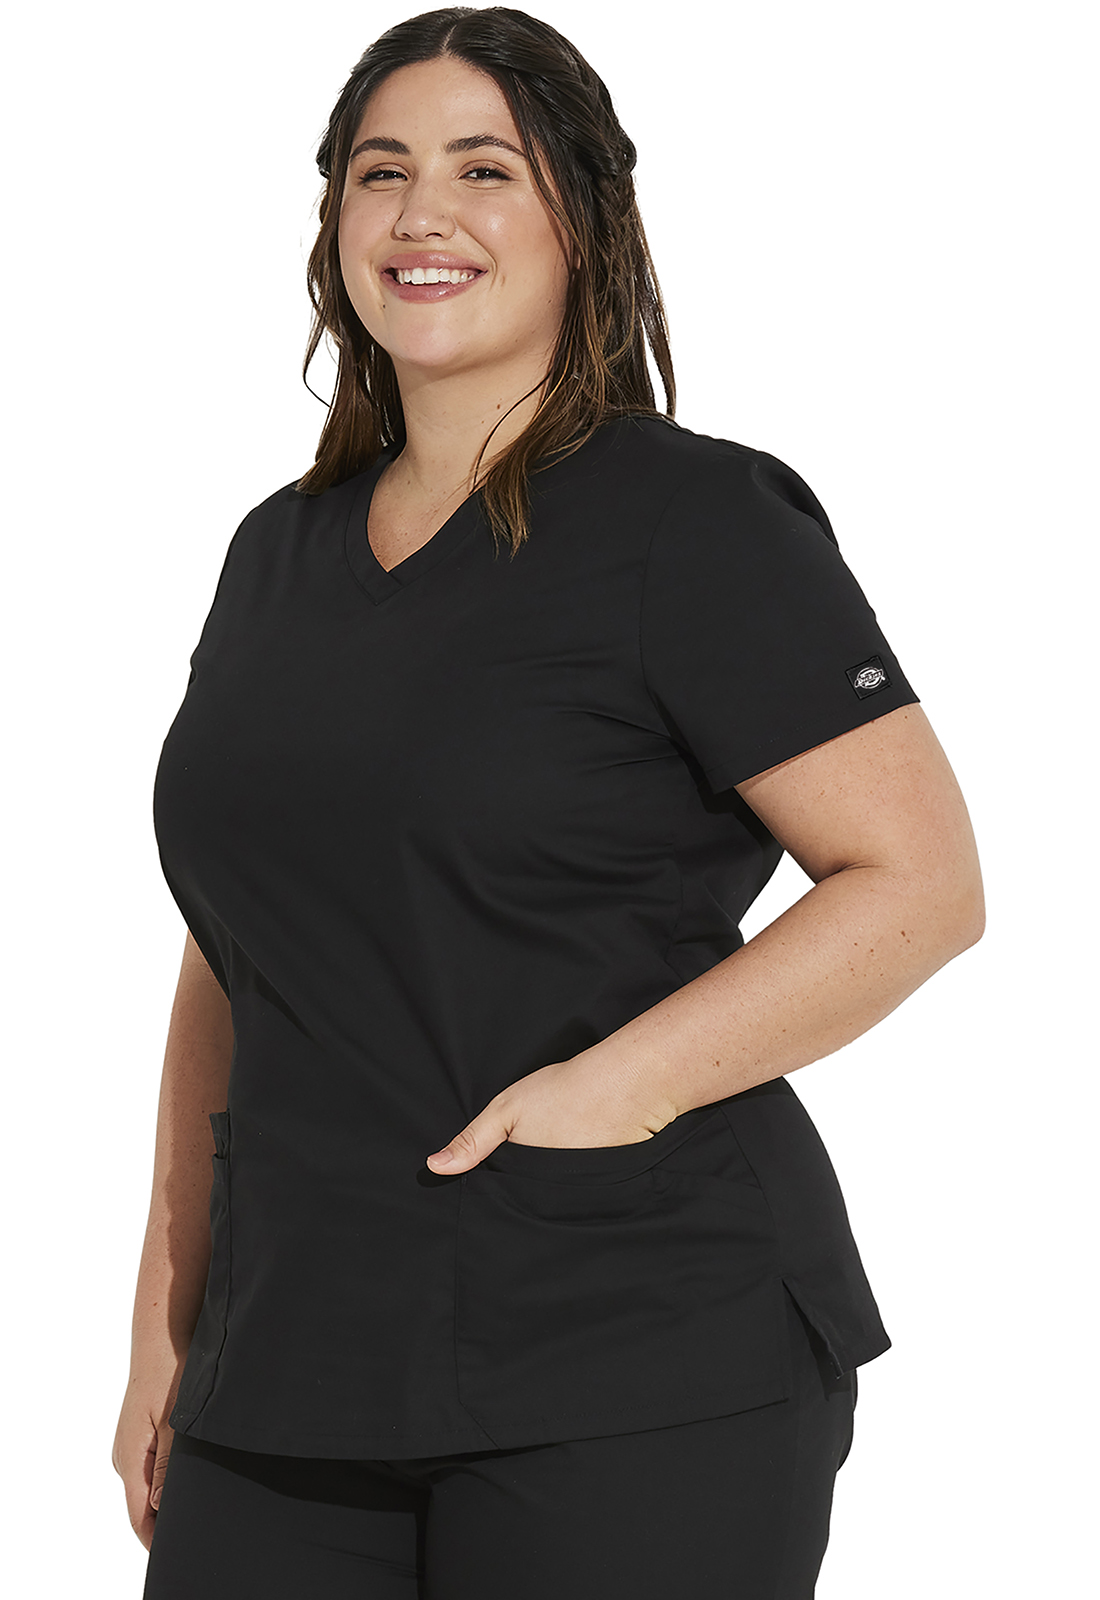 Dickies EDS Signature V-Neck Top in Black from Dickies Medical